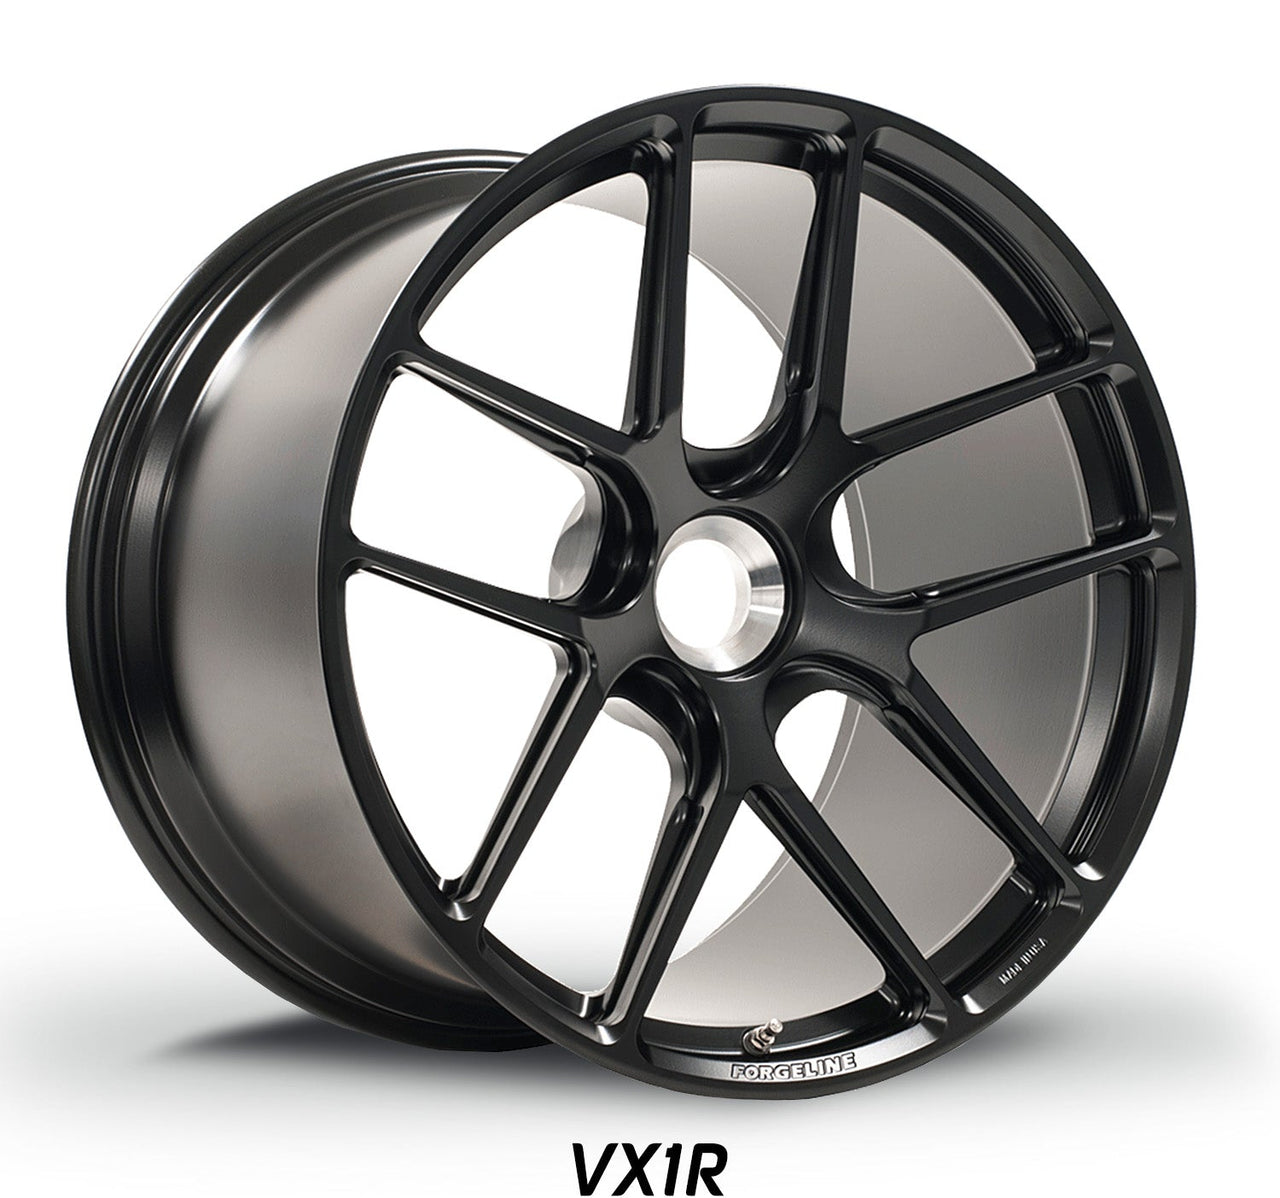 Satin Black Forgeline VX1R wheels fit the Porsche 991 GT3 the best forged wheels for HPDE track days and racing